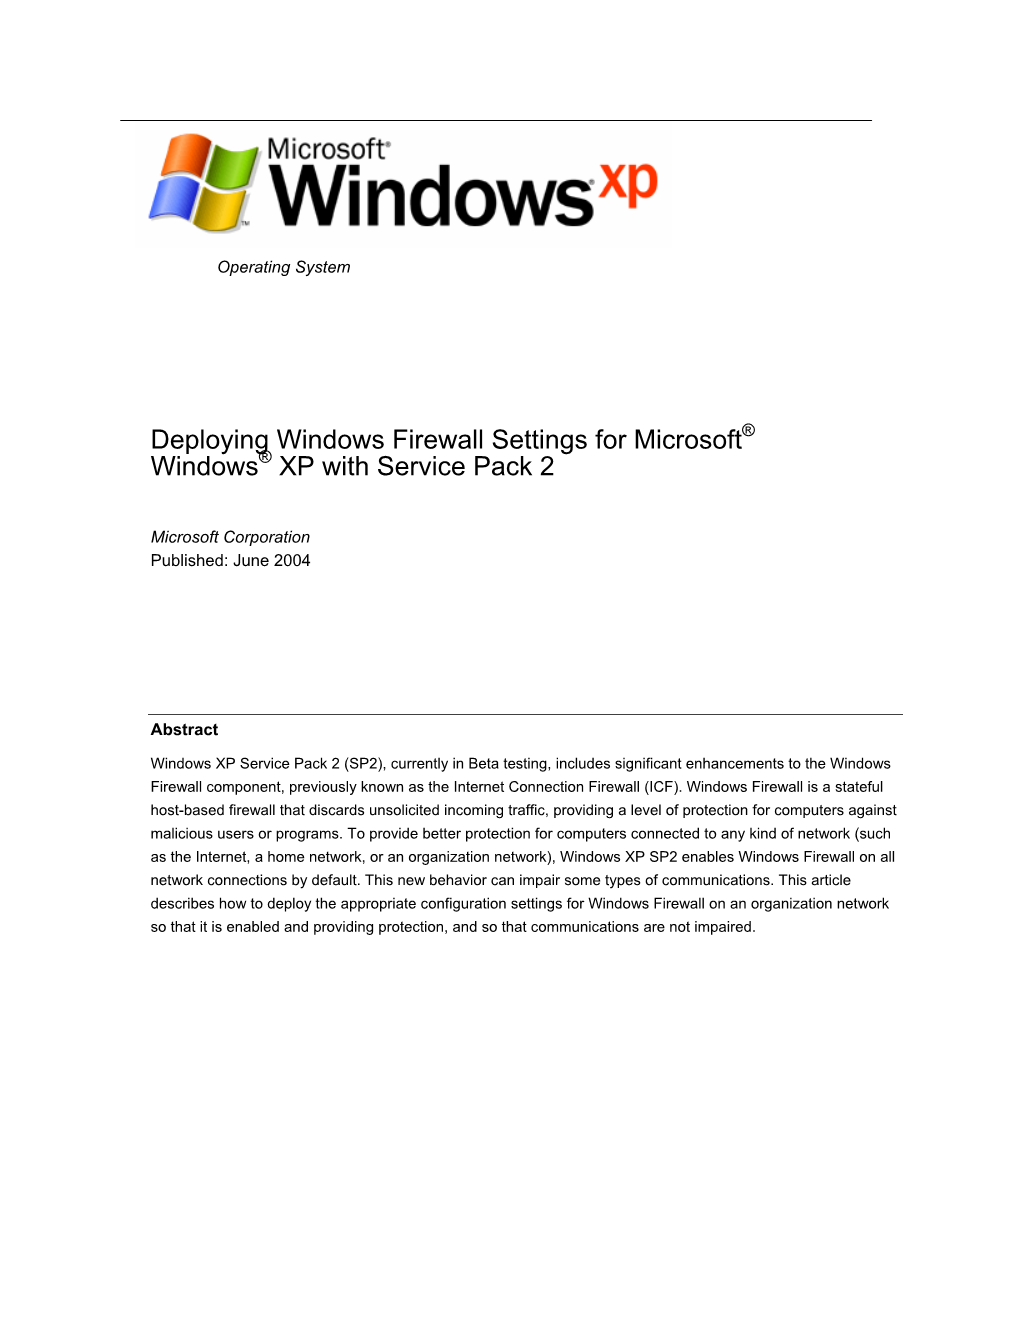 Deploying Windows Firewall Settings for Microsoft Windows XP with Service Pack 2 1 Microsoft® Windows® XP Technical Article